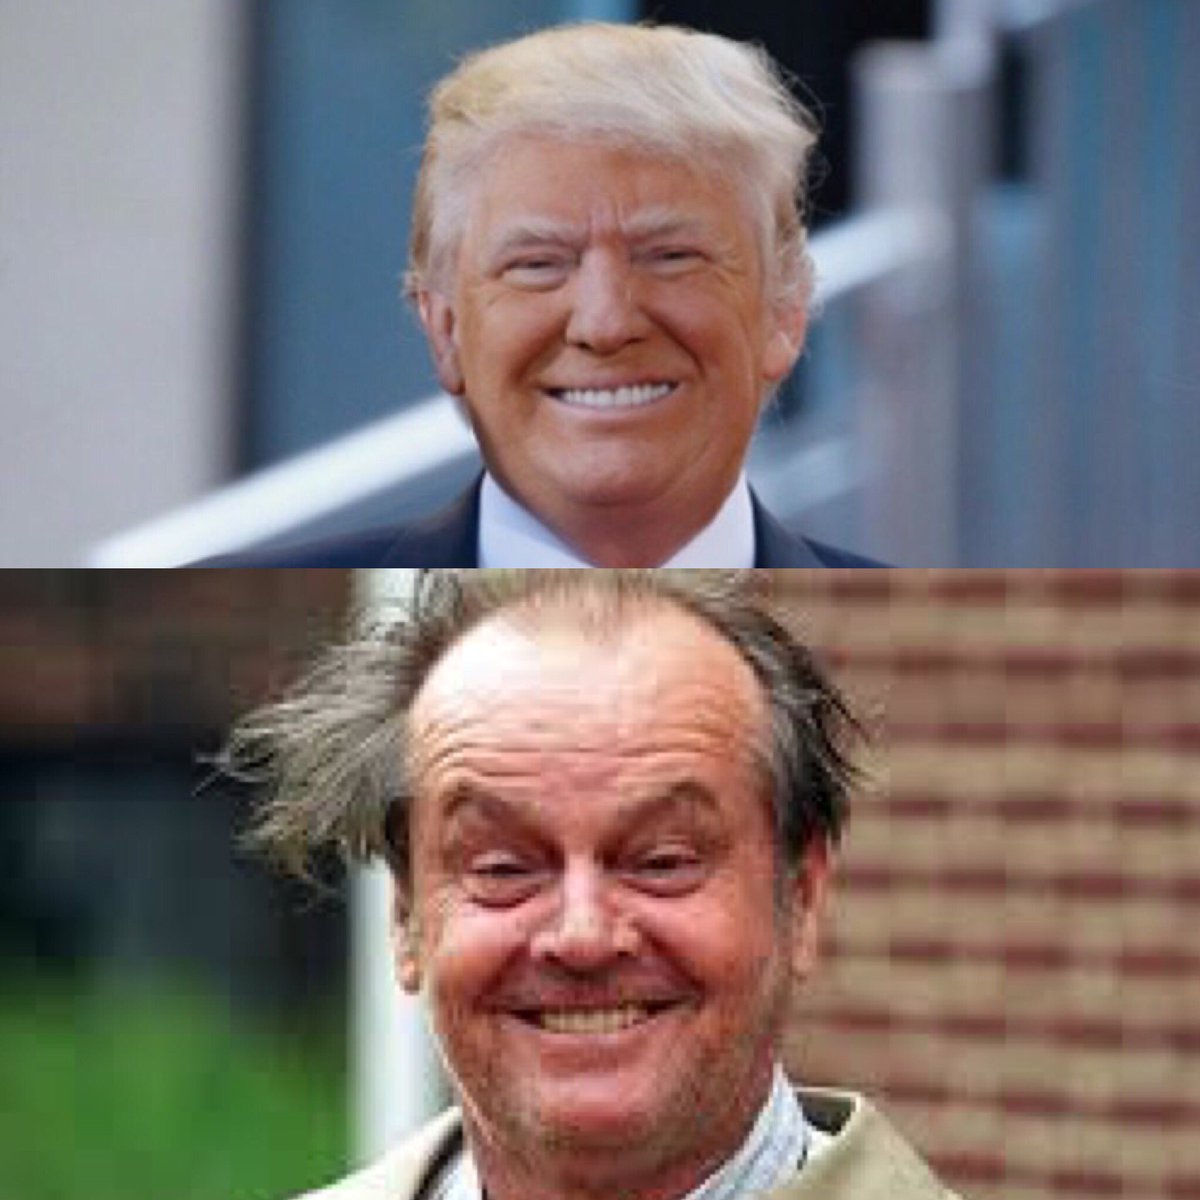 Ok I’m going to celebrate Flynn Flippage Friday by casting Trump Treason: The Movie. The role of Donald J. Trump will be played by Jack Nicholson.